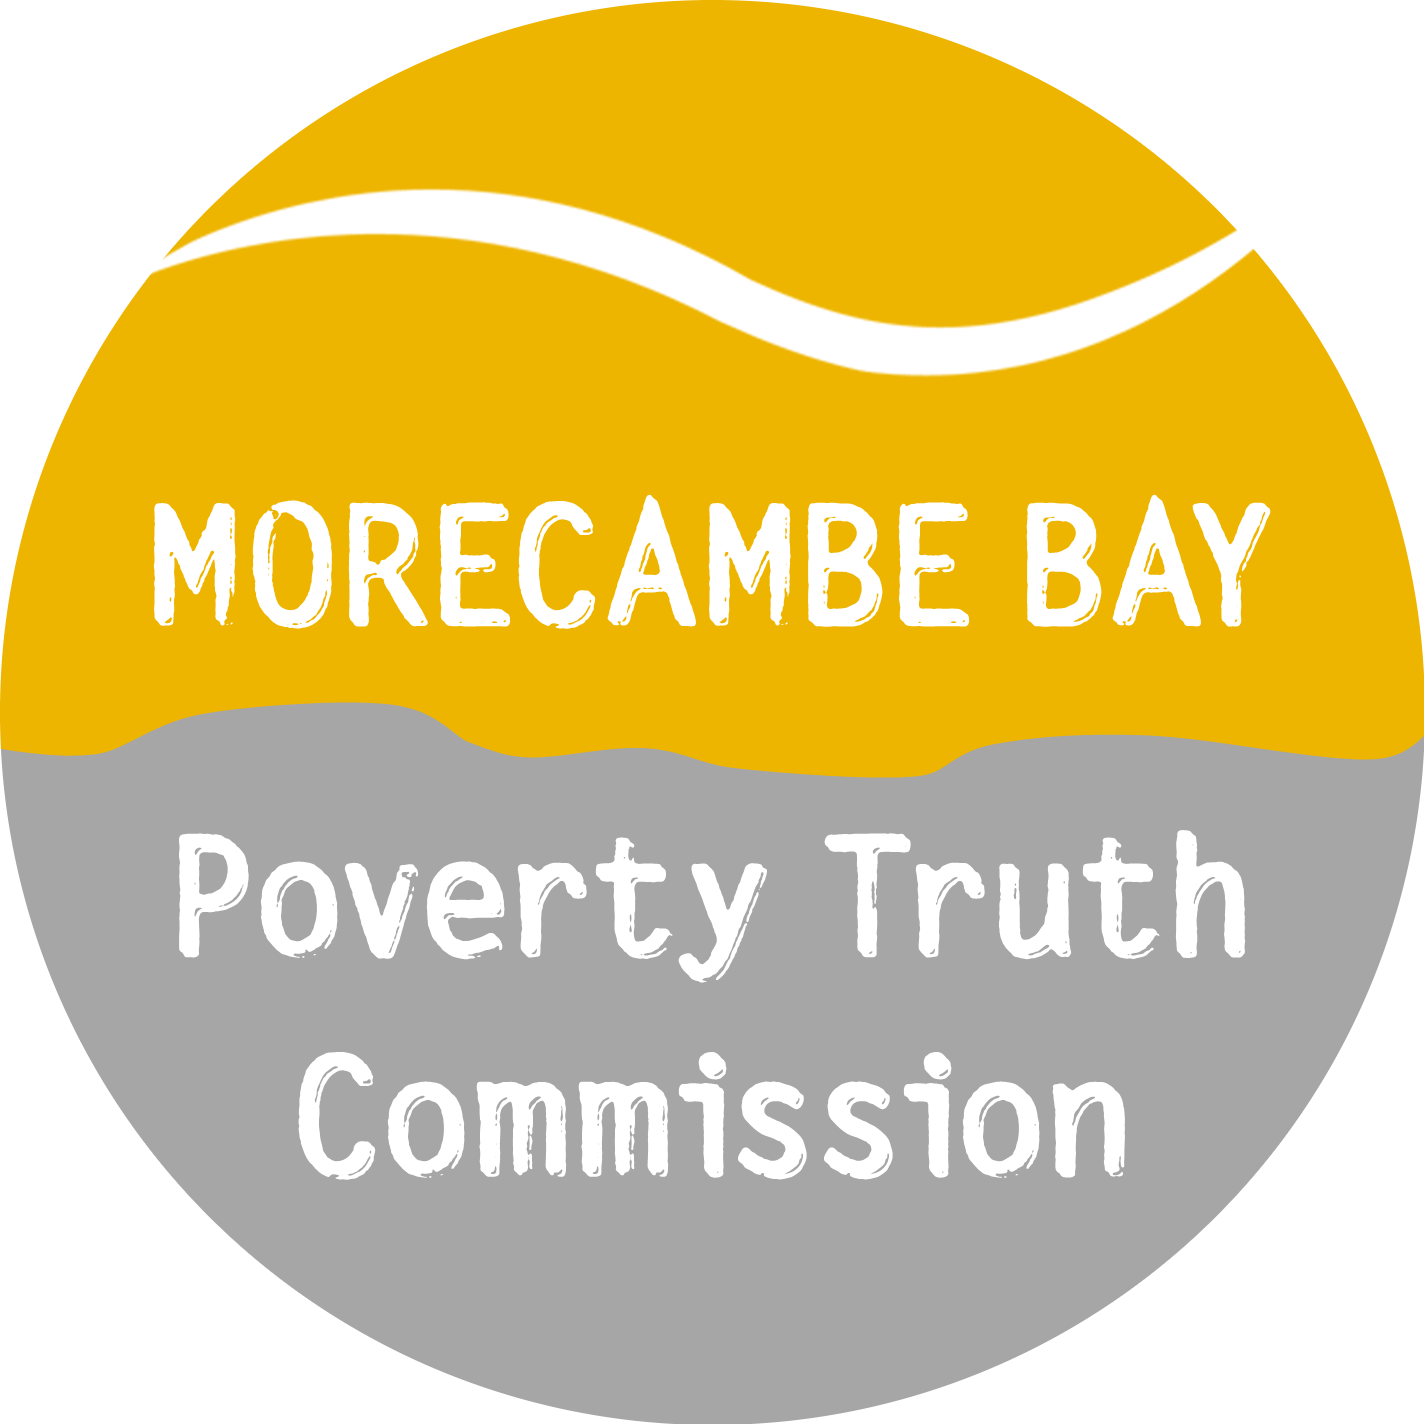 Morecambe Bay Poverty Truth Commission